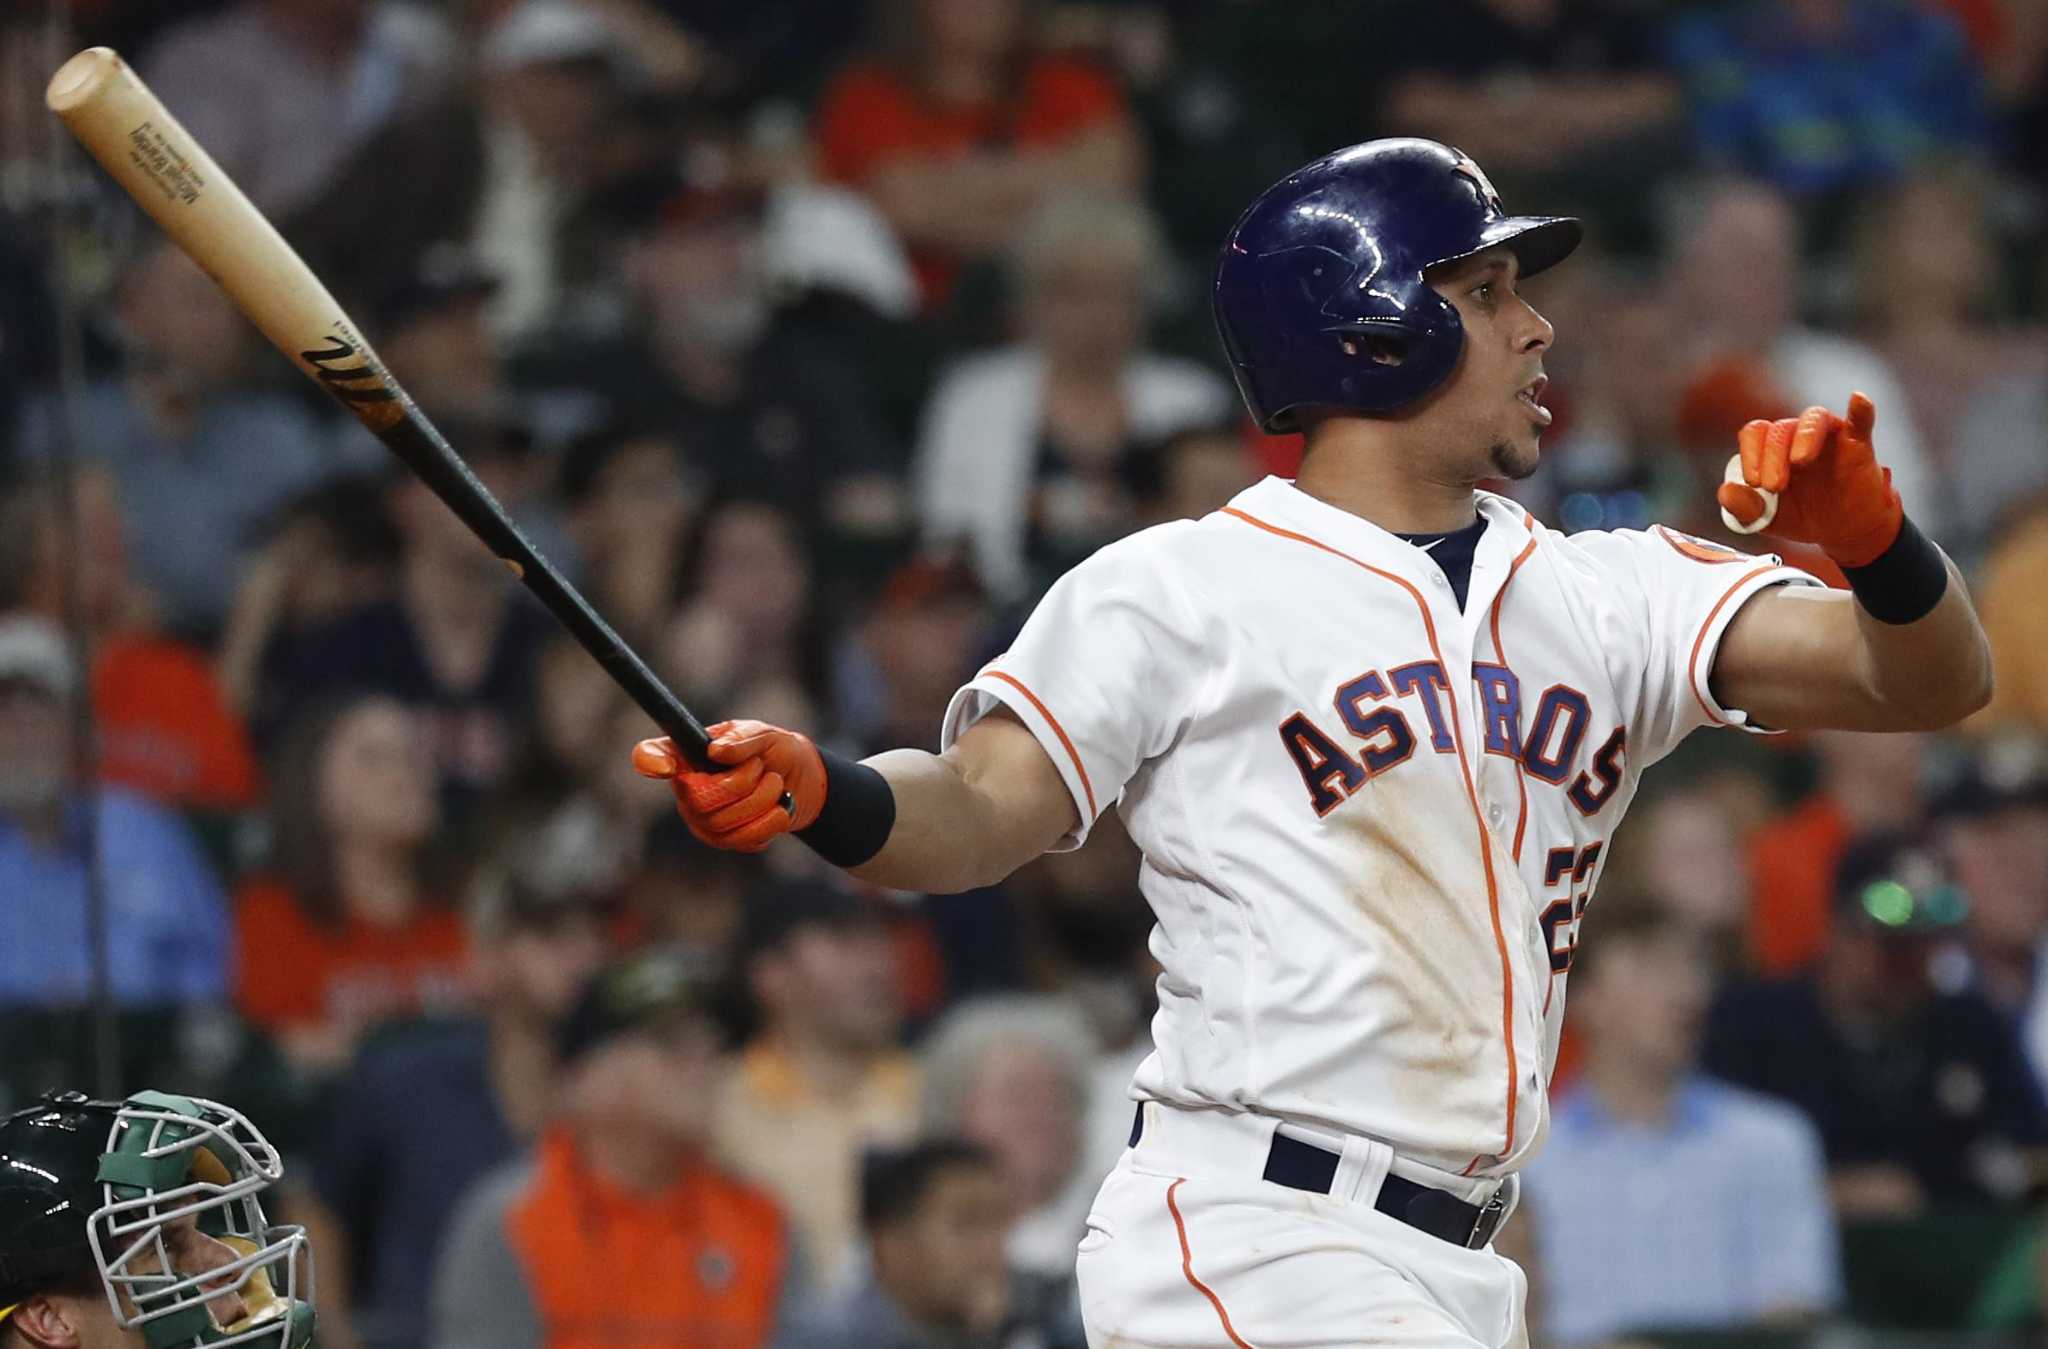 Sizzling Michael Brantley has been everything Astros dreamed